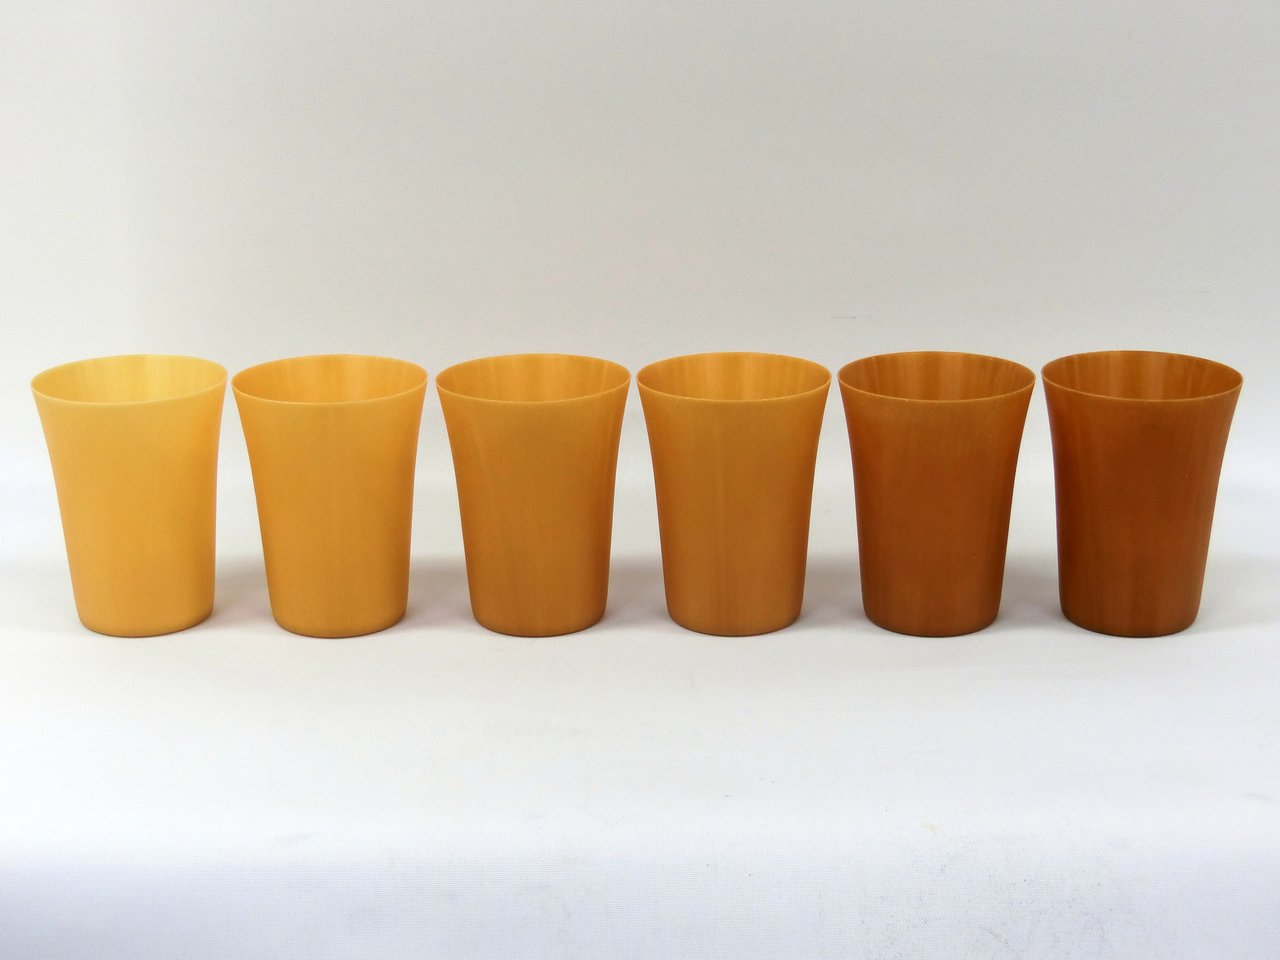 Tumblers manufactured from cellulose fiber. (Courtesy of Panasonic)